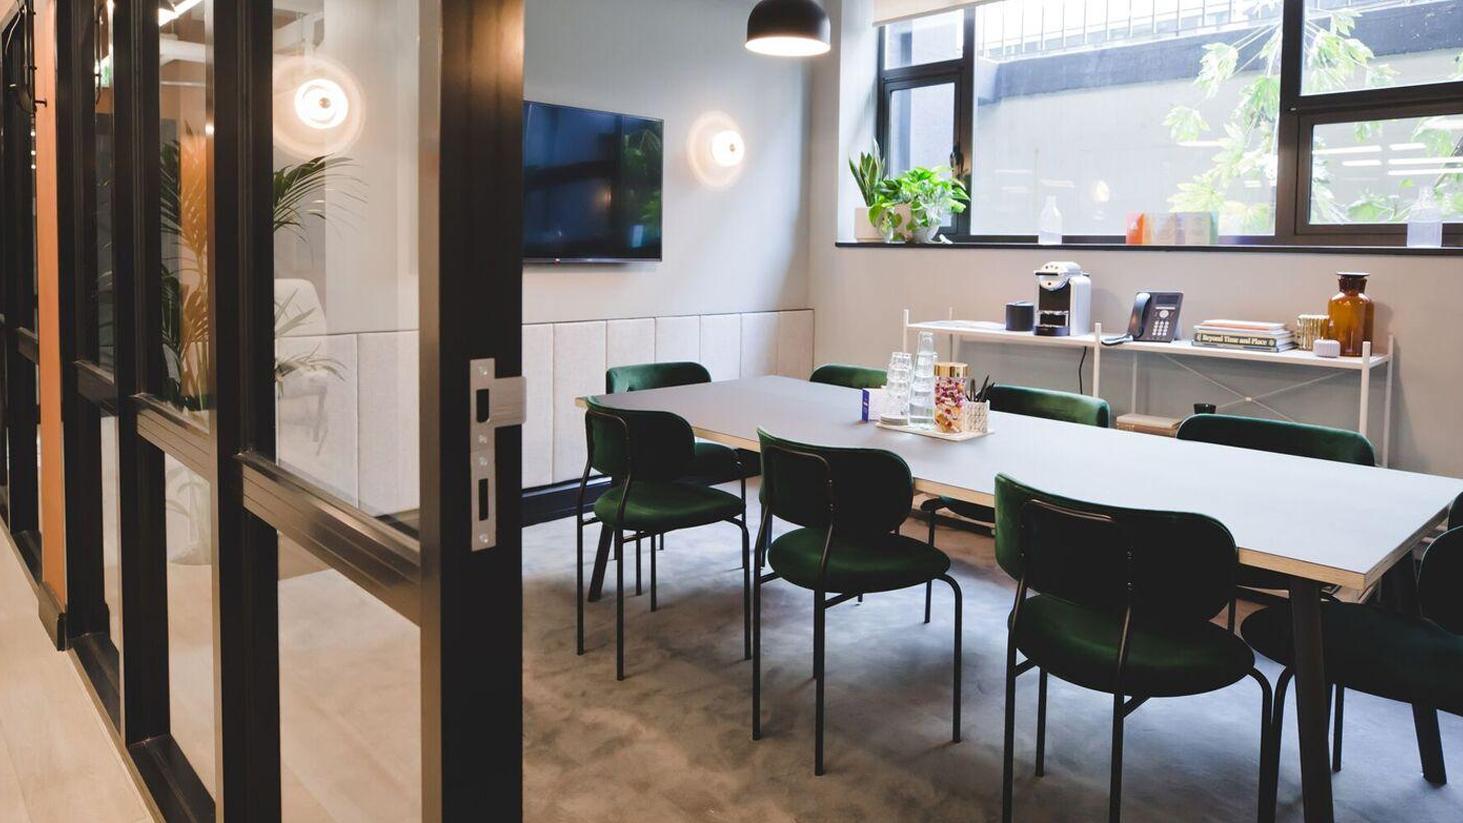 Find your Meeting Room in Farringdon